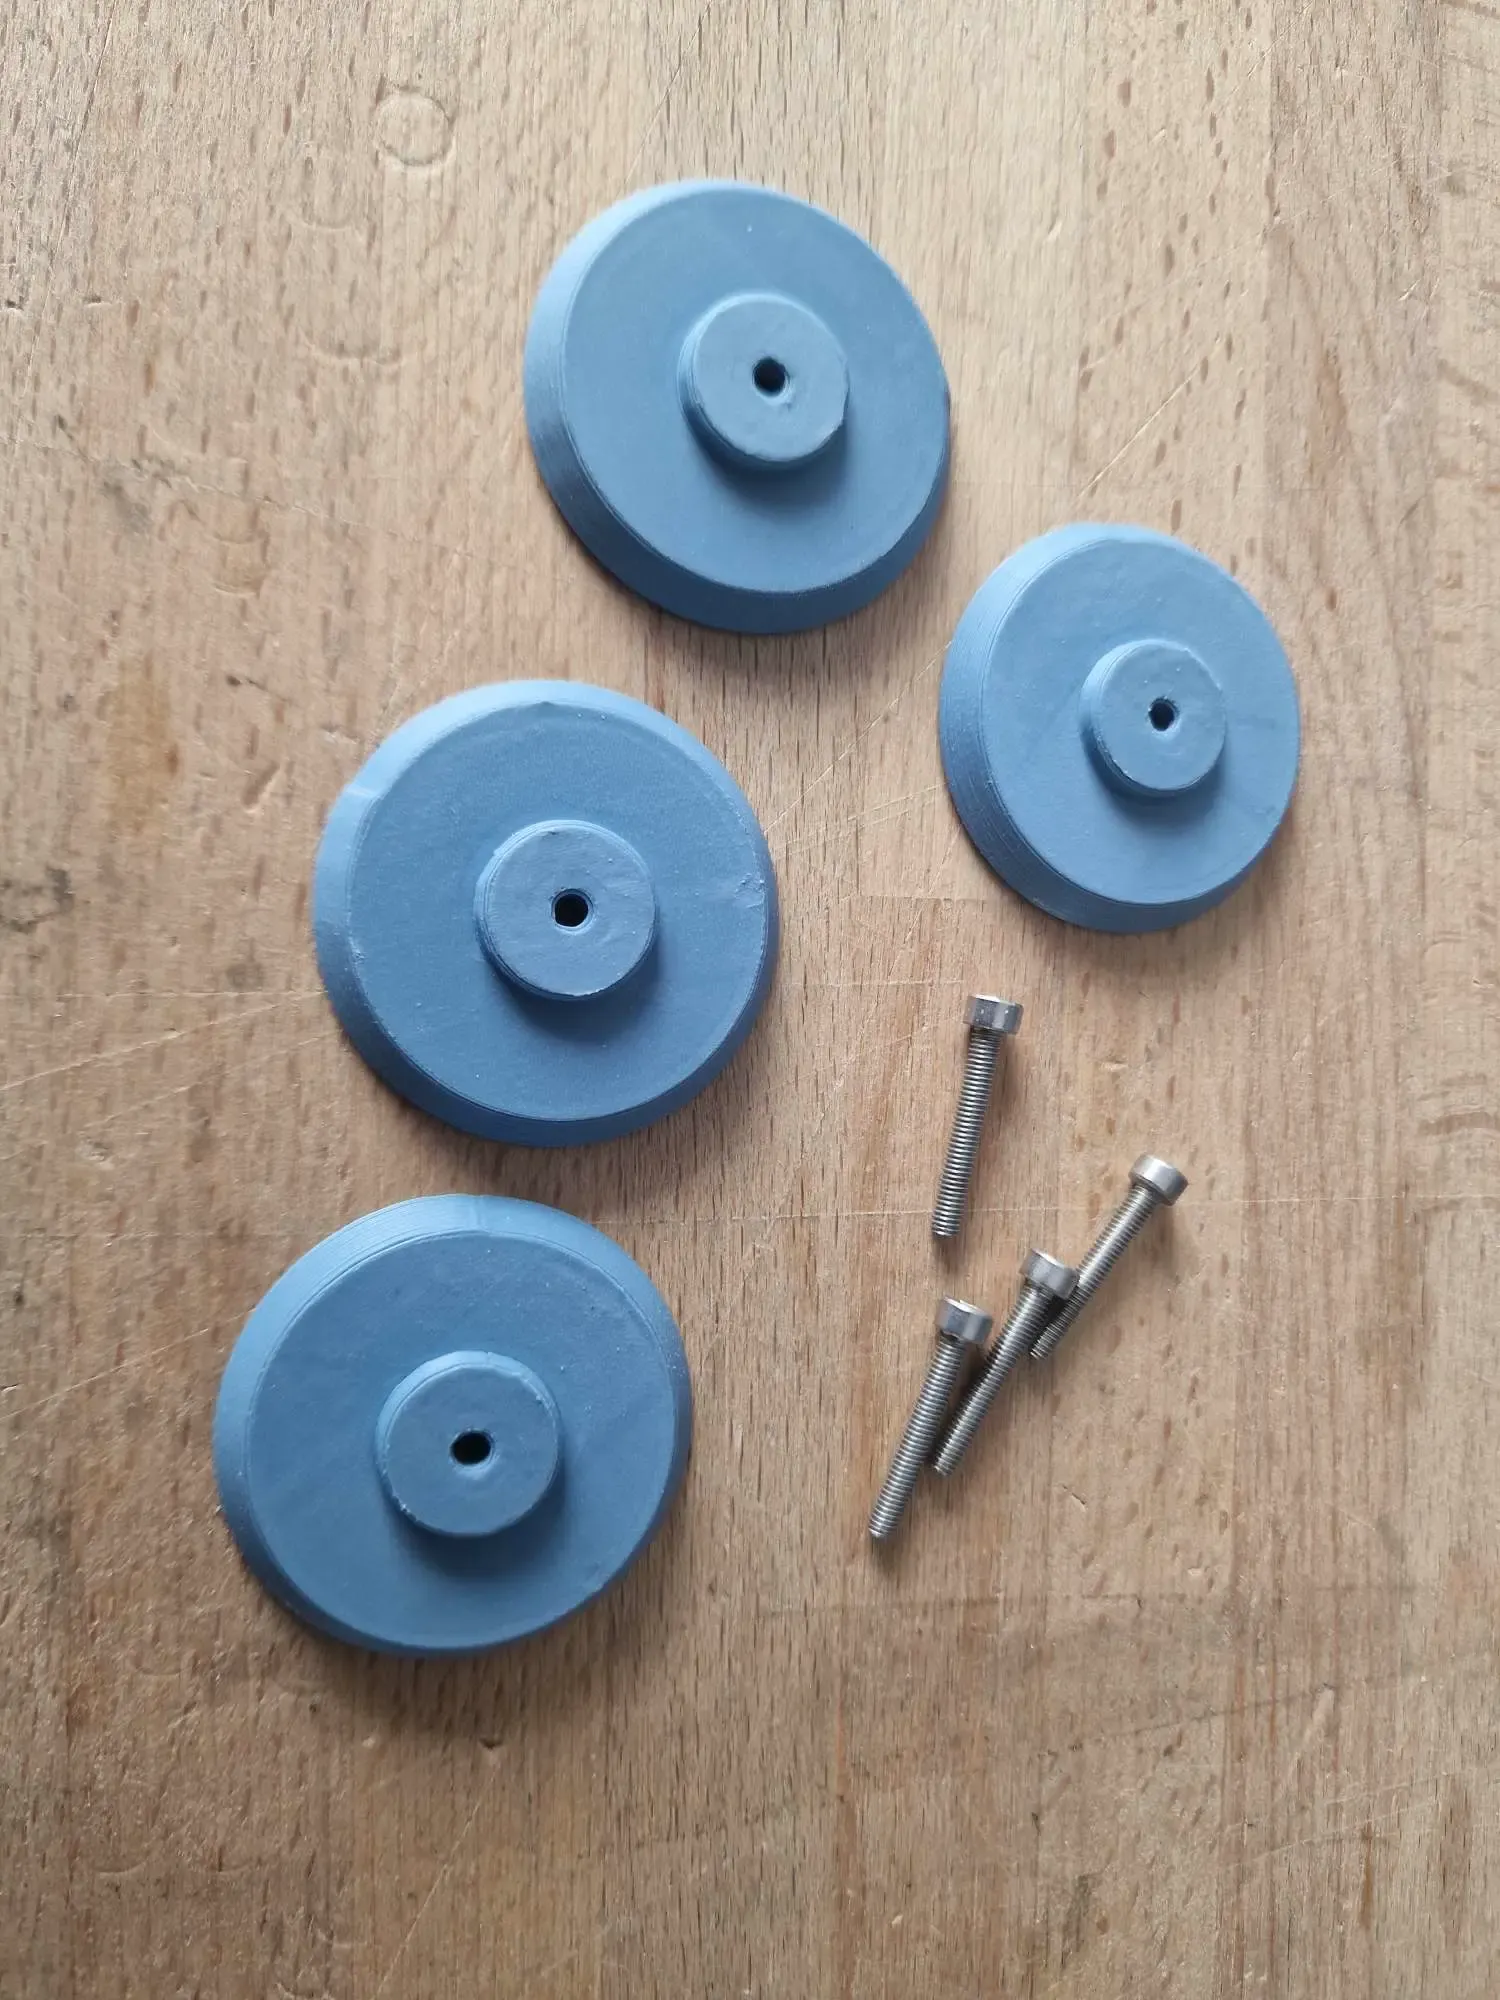 Discs for K1 Rubber Buffers so that they no longer fall off